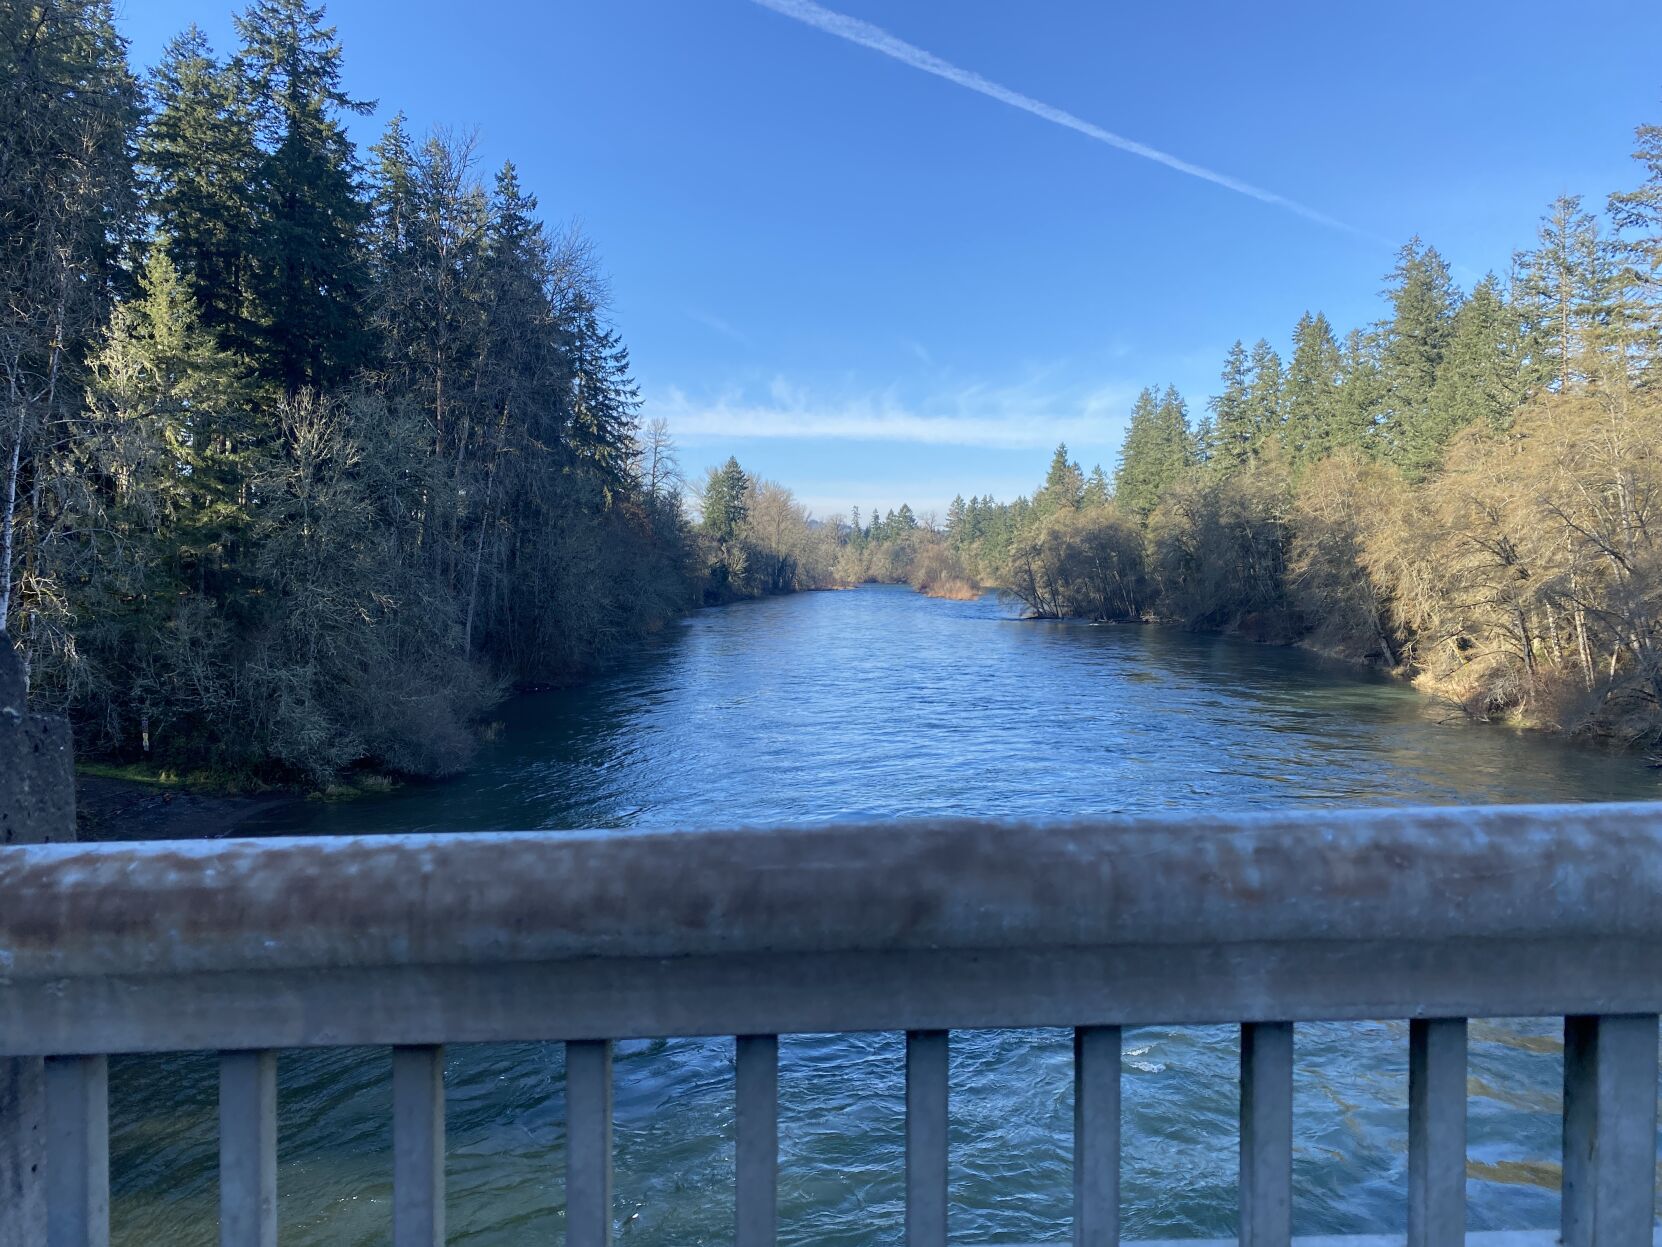 Water rescuers save stranded tuber on South Santiam River hq nude photo